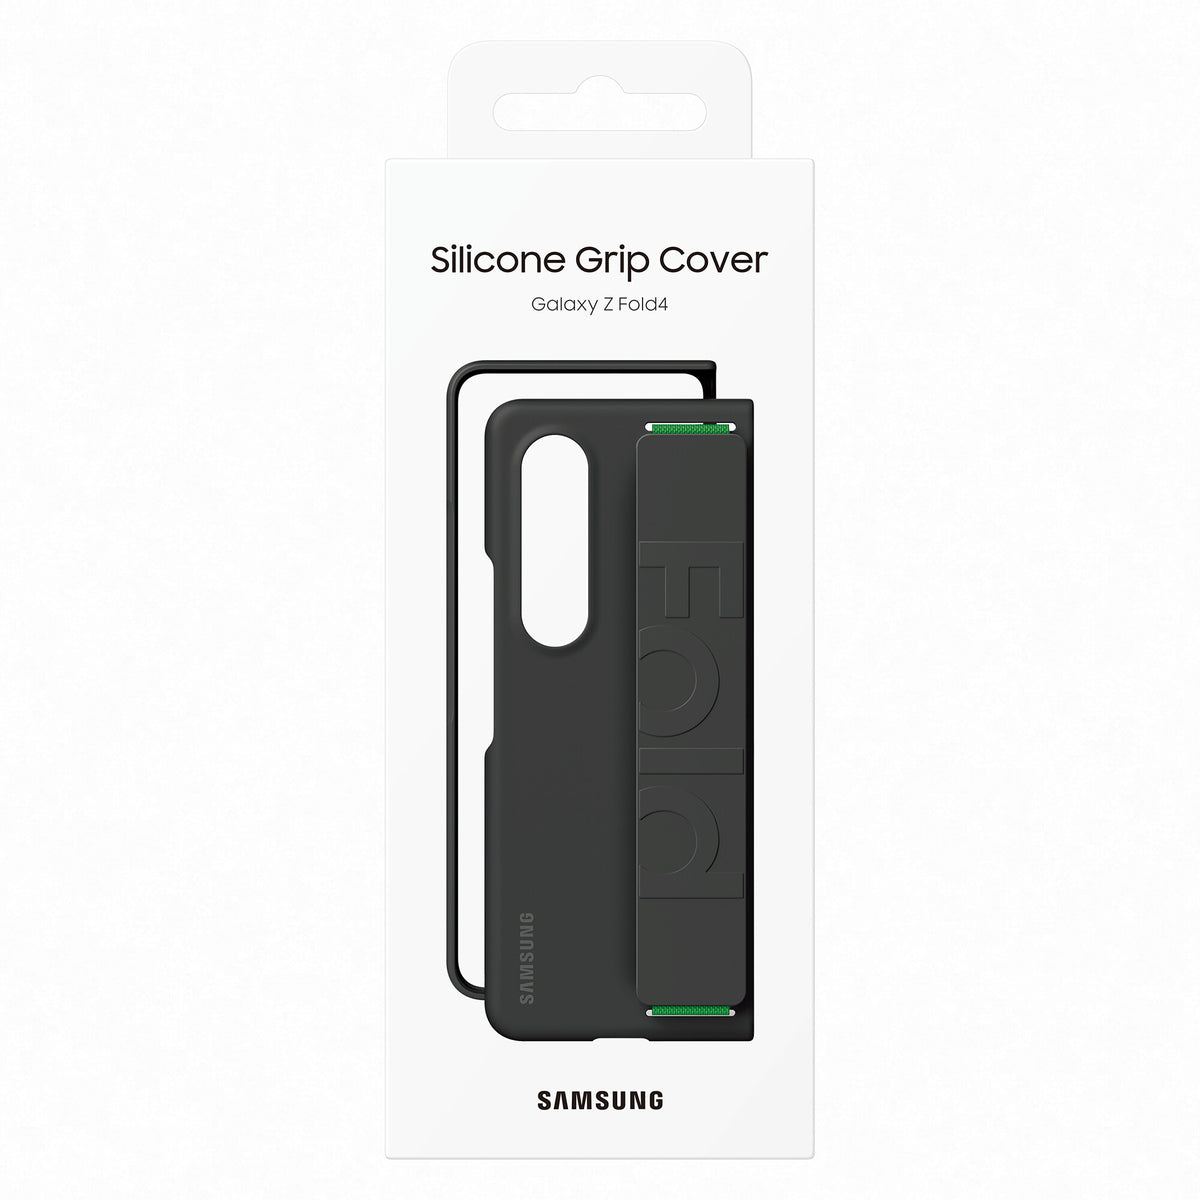 Samsung mobile phone fold case with strap for Galaxy Z Fold4 in Black